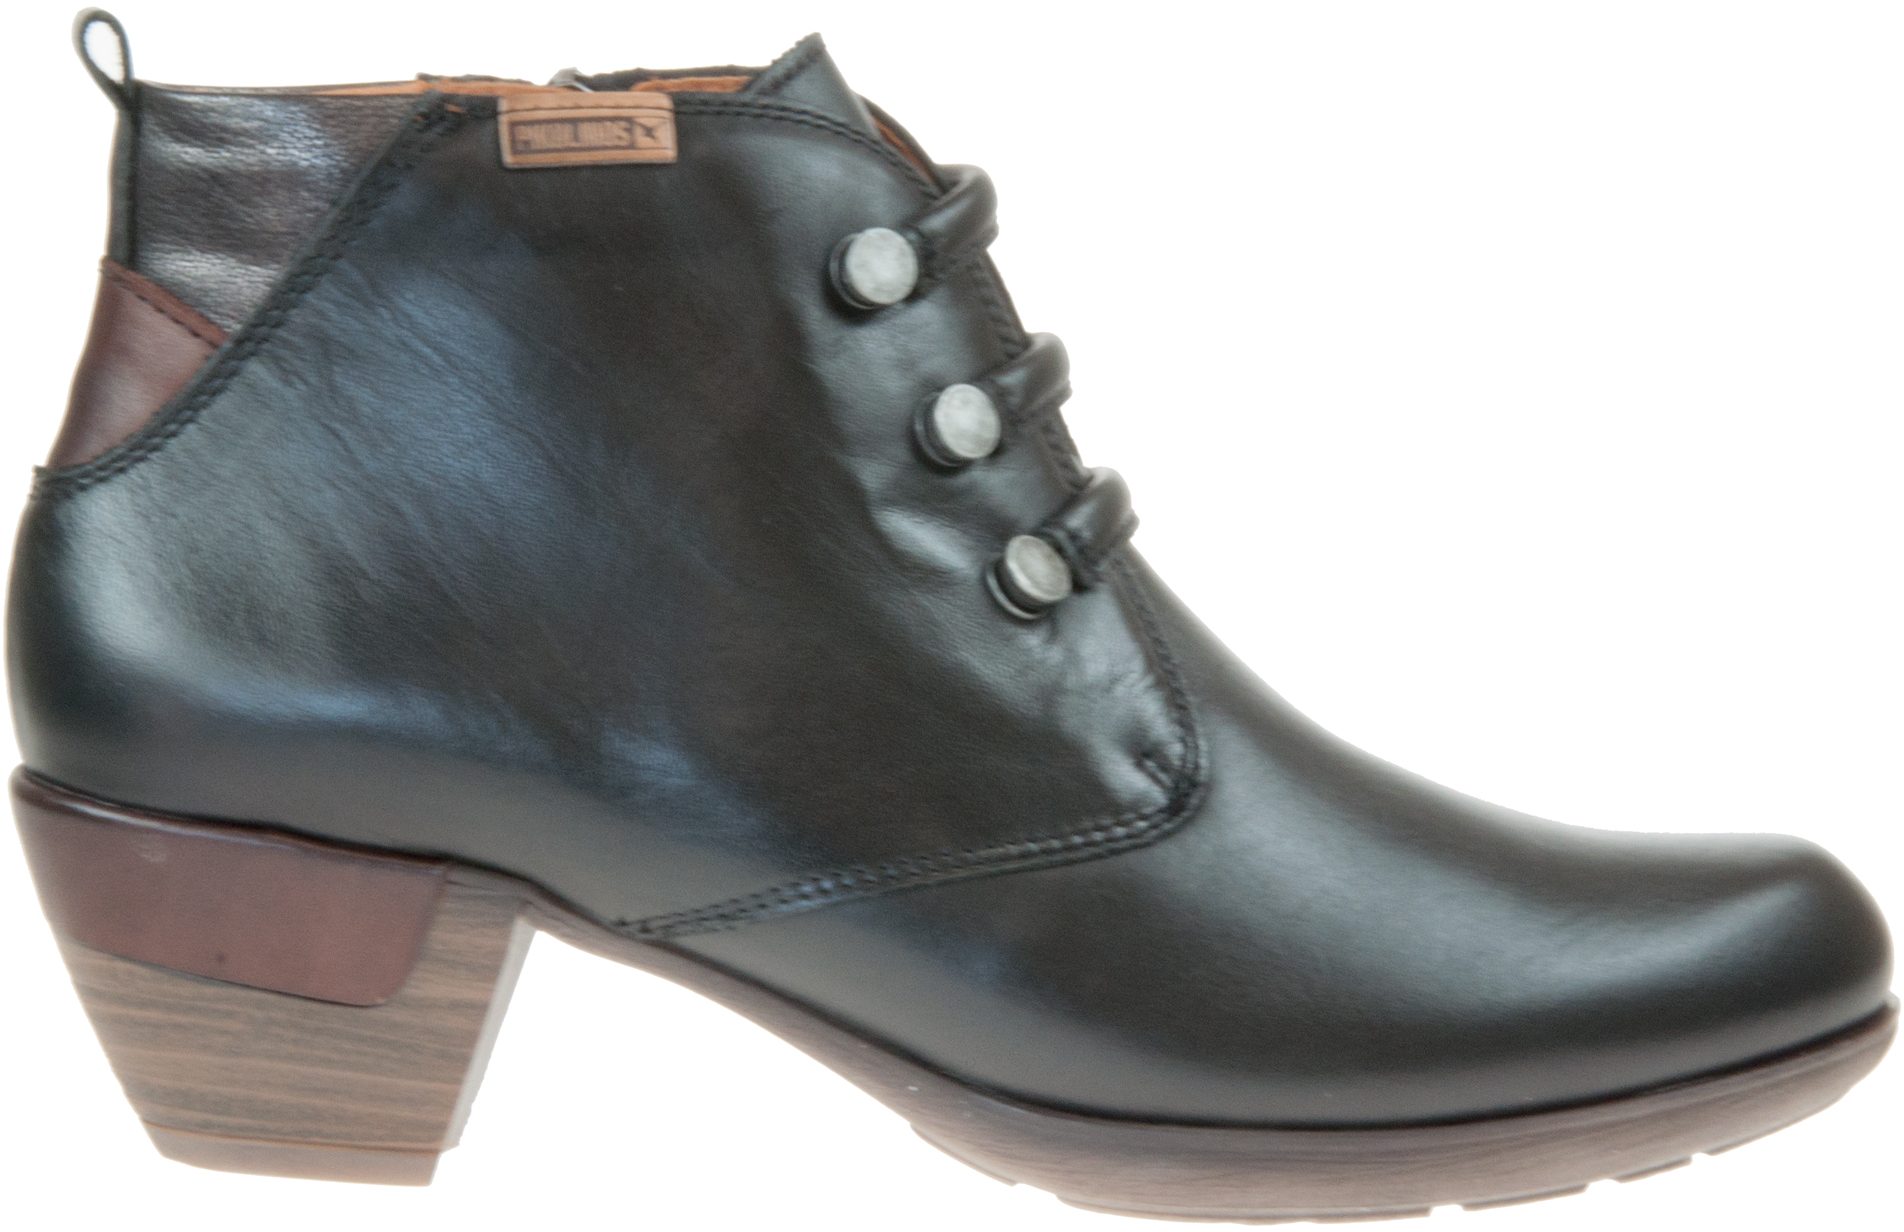 Pikolinos Rotterdam 8746 Black 902-8746 000 - Ankle Boots - Humphries Shoes